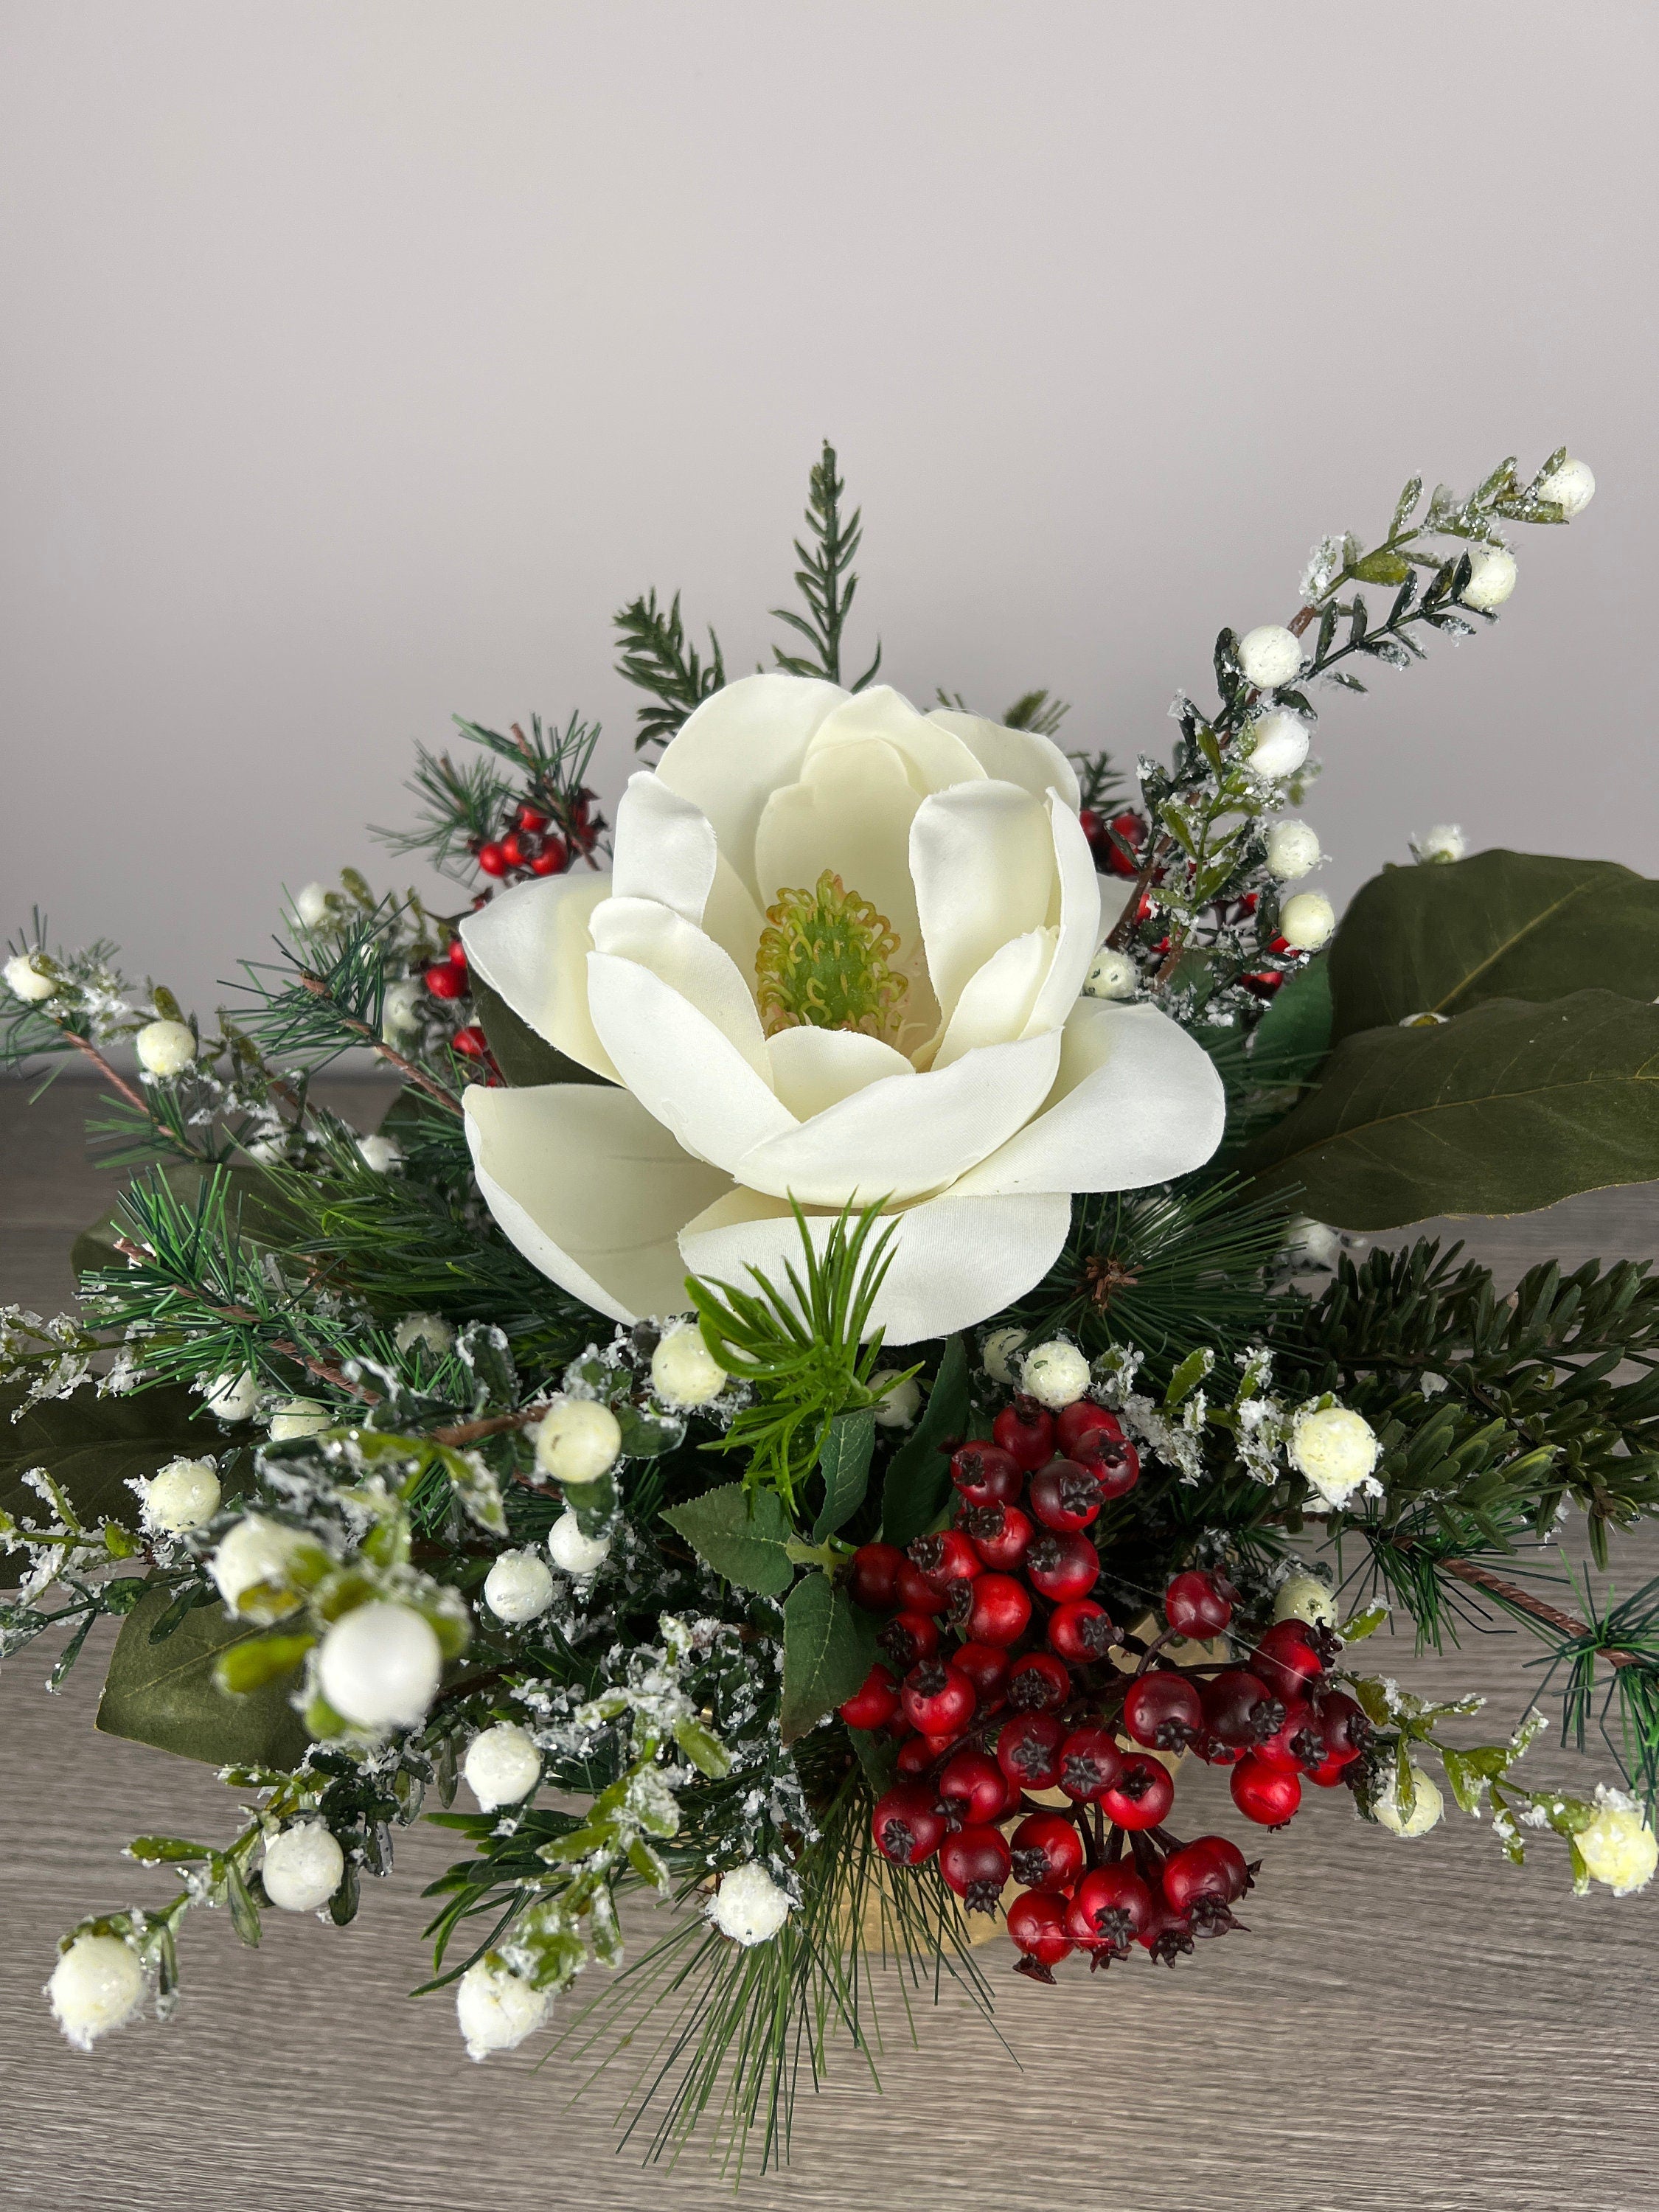 White Magnolia with Red and White Berries